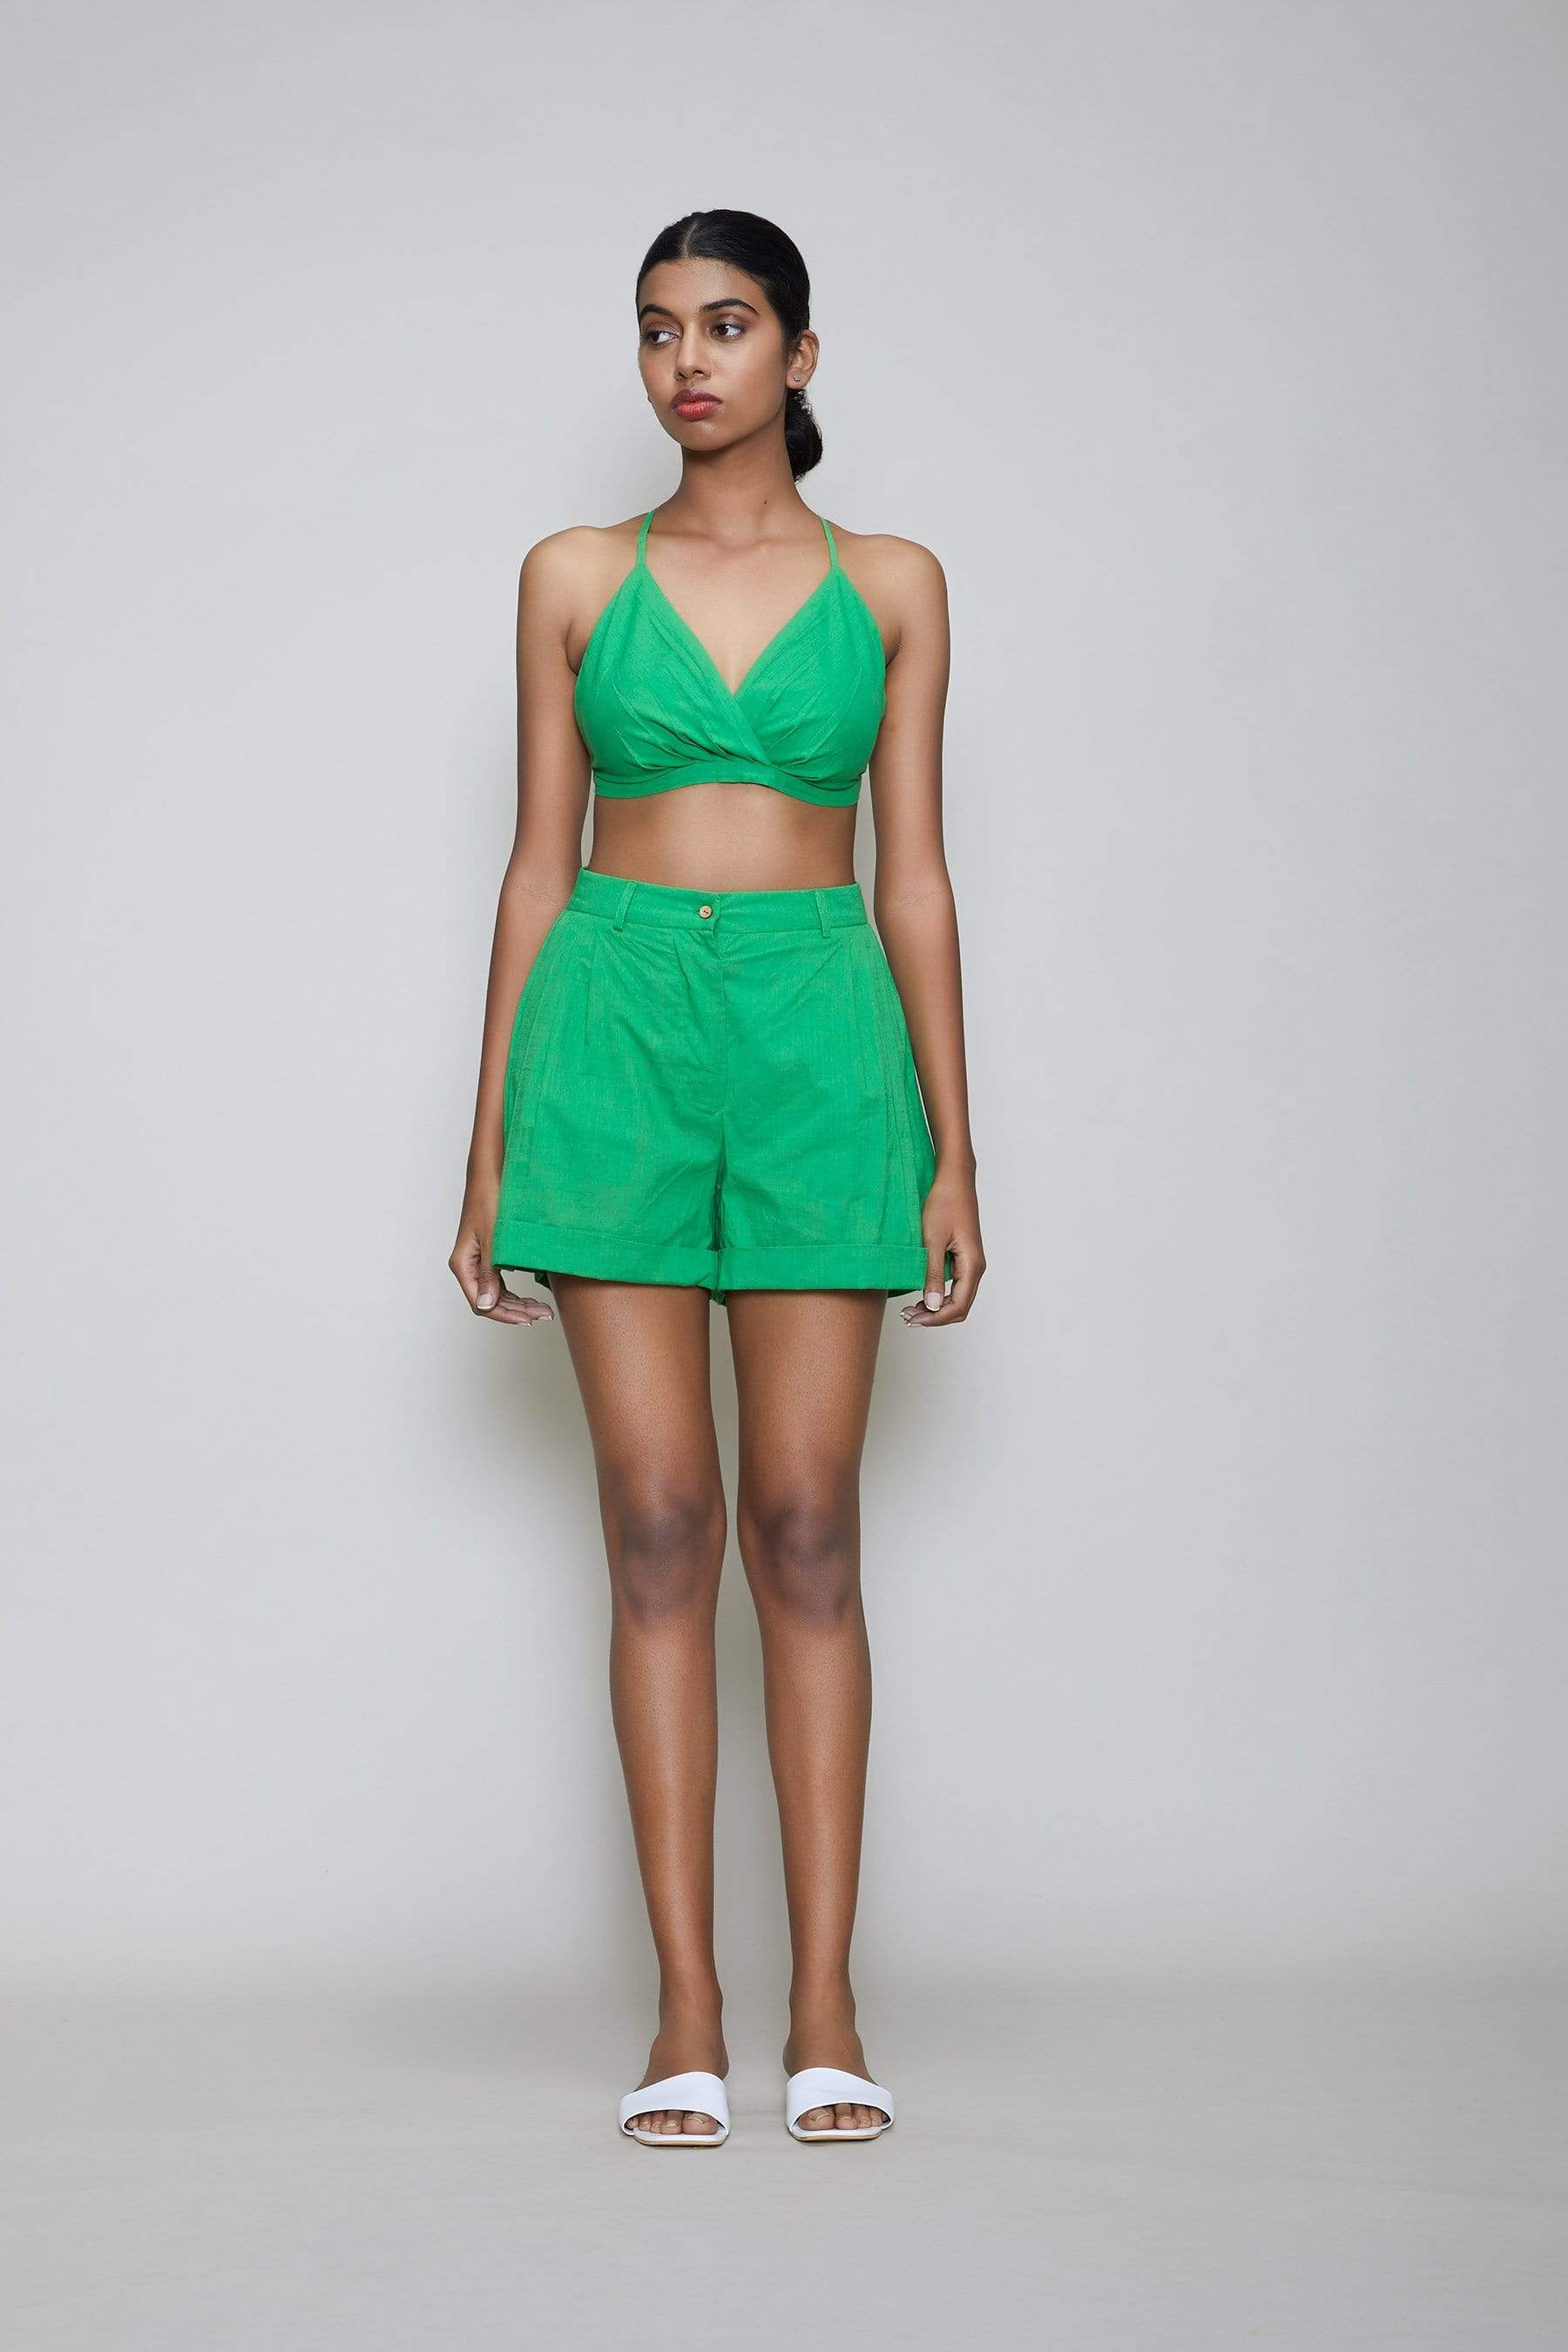 https://www.stylemati.in/cdn/shop/products/mati-separates-mati-bralette-and-shorts-set-green-bralette-top-in-cotton-stripes-beach-stripe-bra-top-and-pant-set-28022095741017_2400x.jpg?v=1626169957